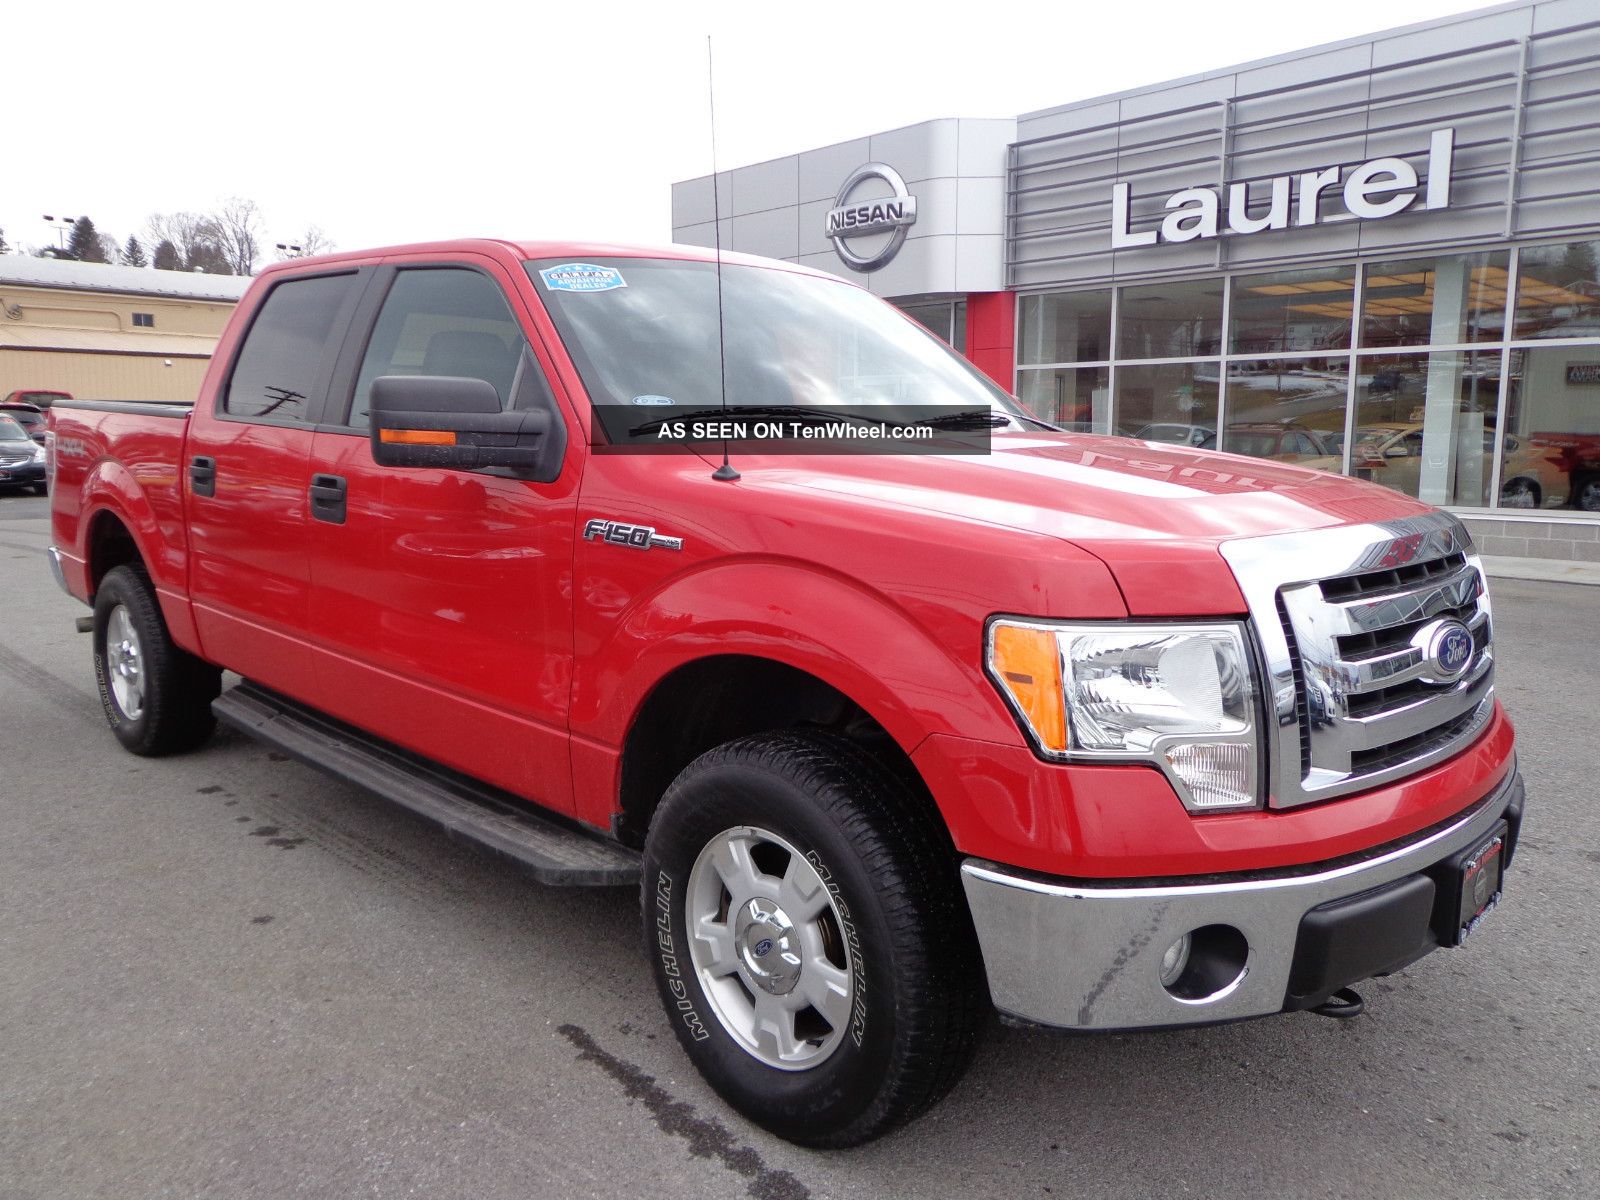 2010 Ford F 150 Xlt 5.4 L V8 Towing Capacity